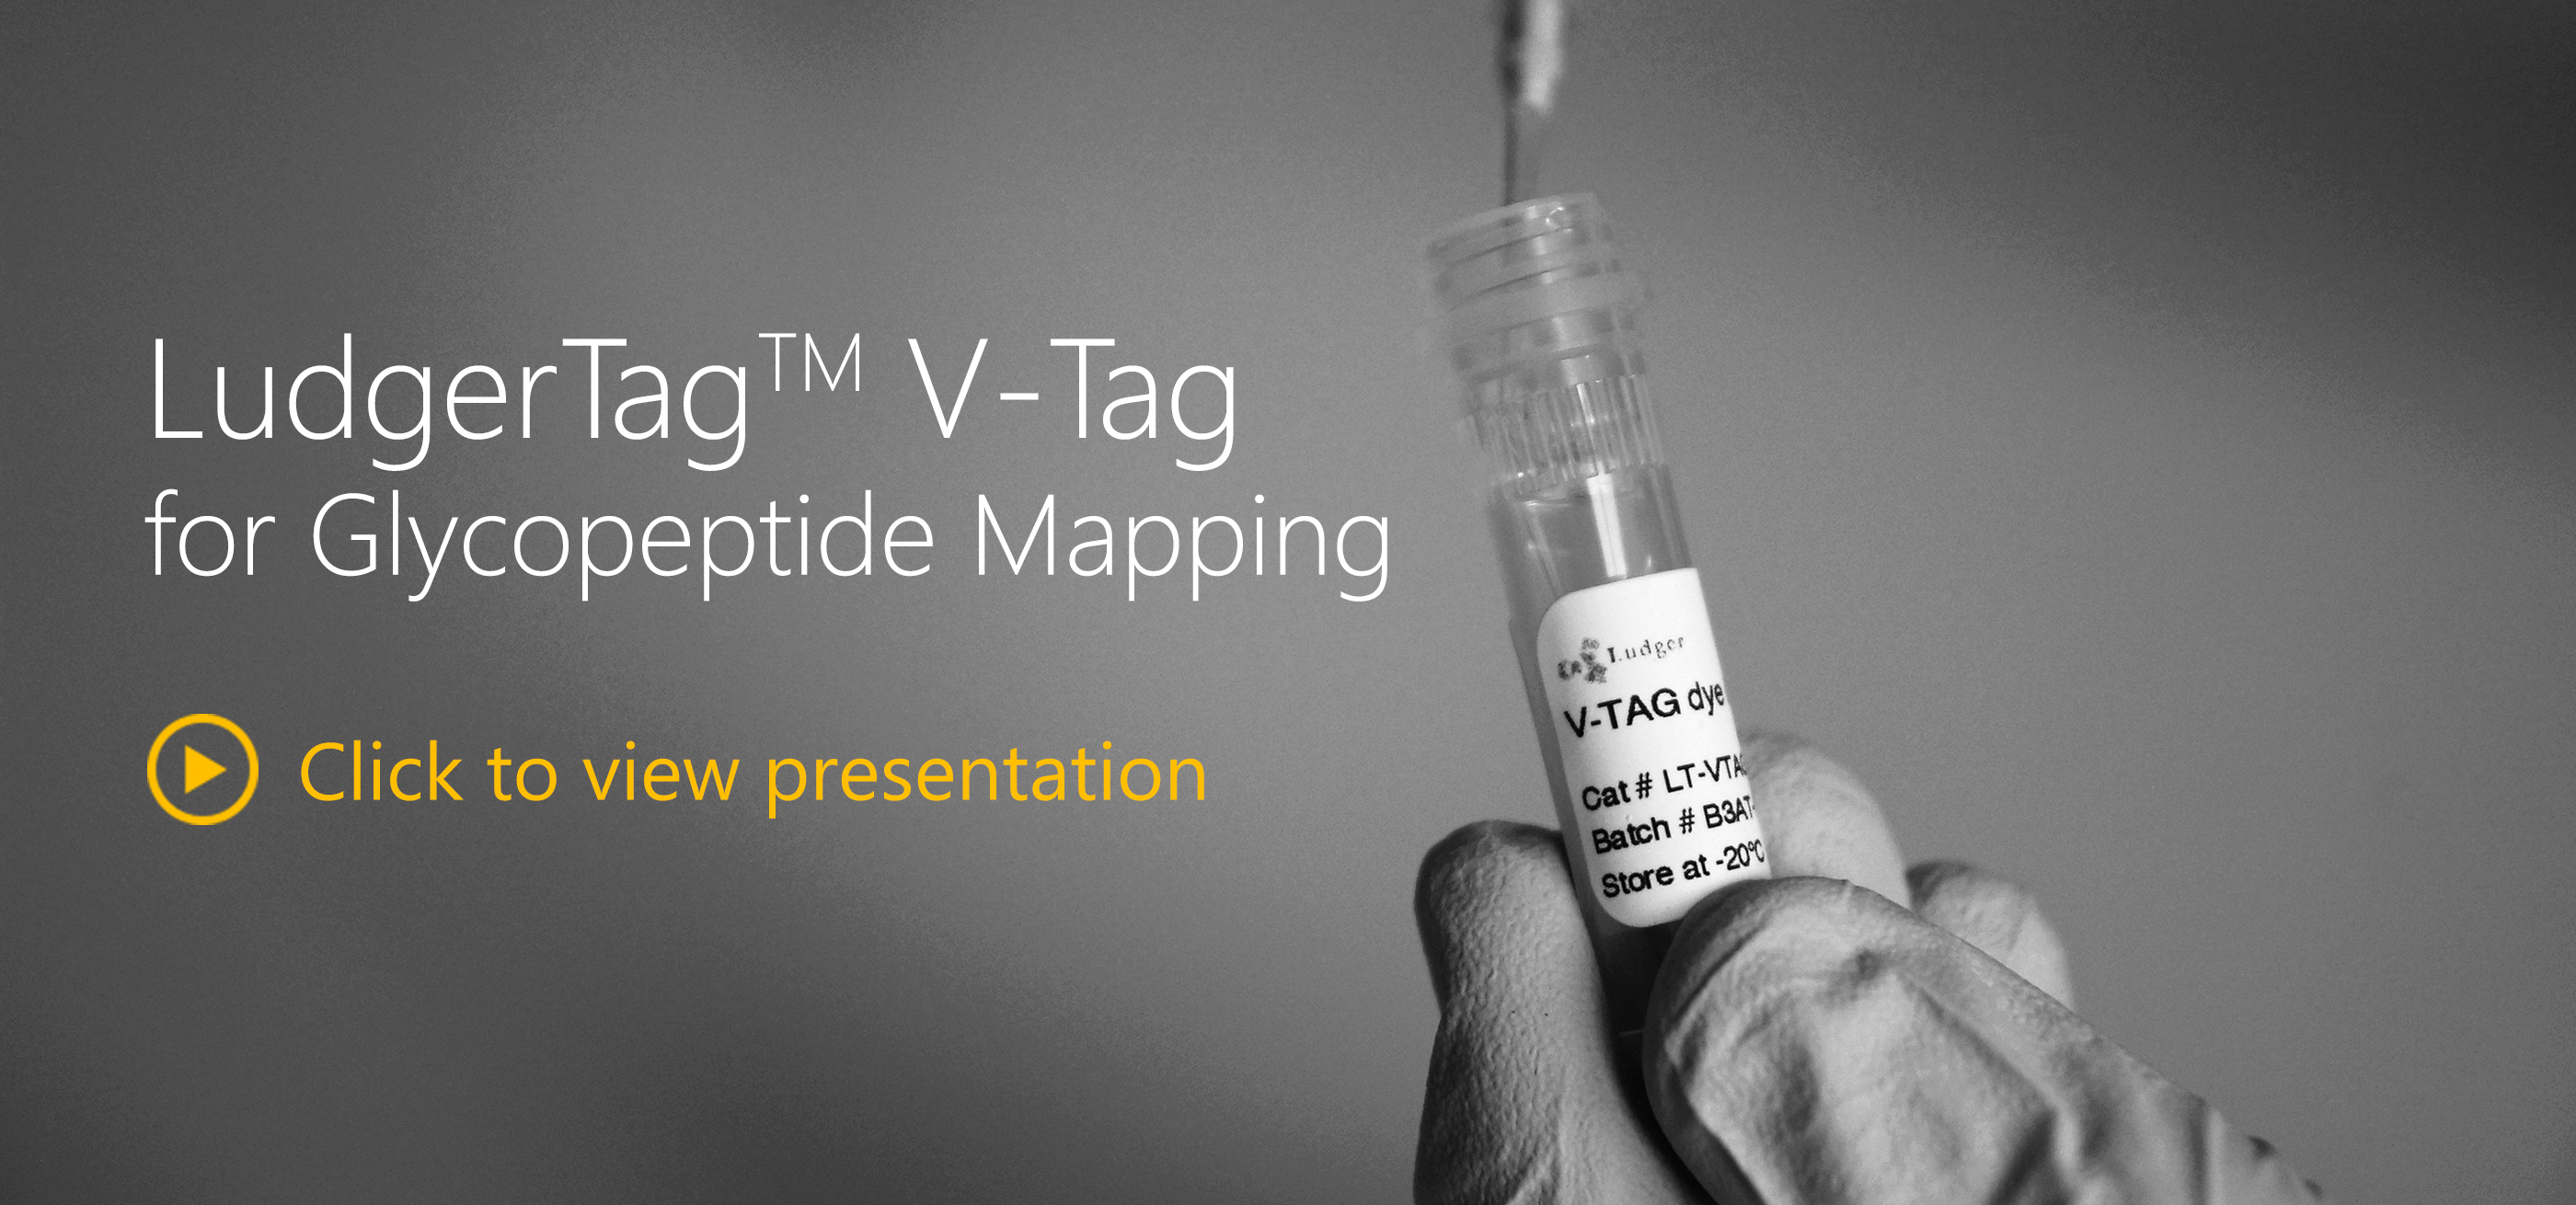 LudgerTag V-Tag for Glycopeptide Mapping